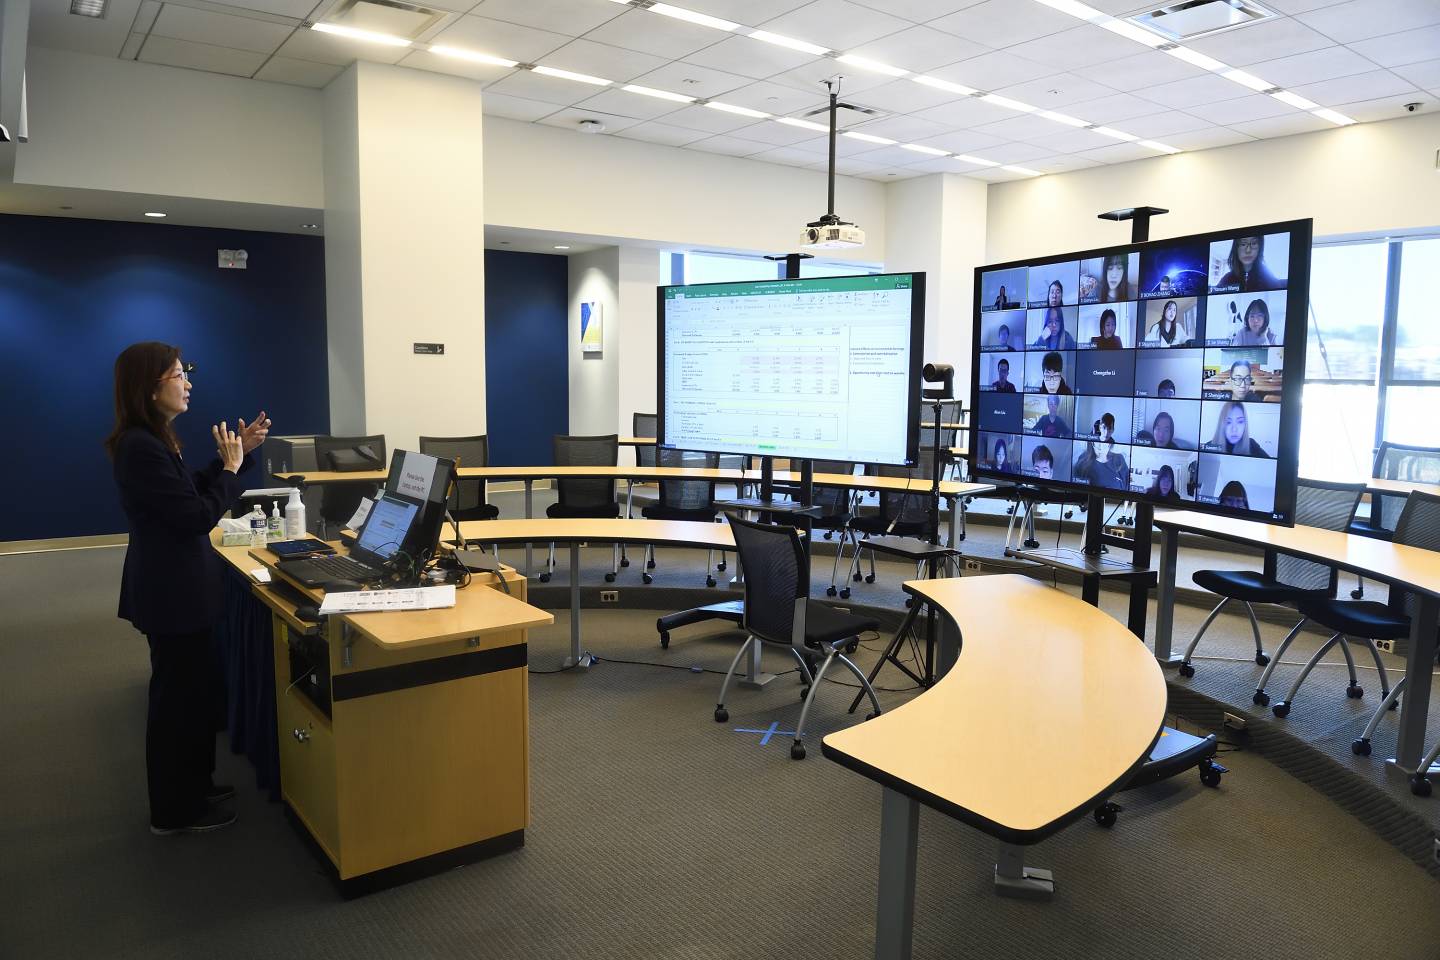 A woman in an empty seminar room teaches in front of a large digital screen of students